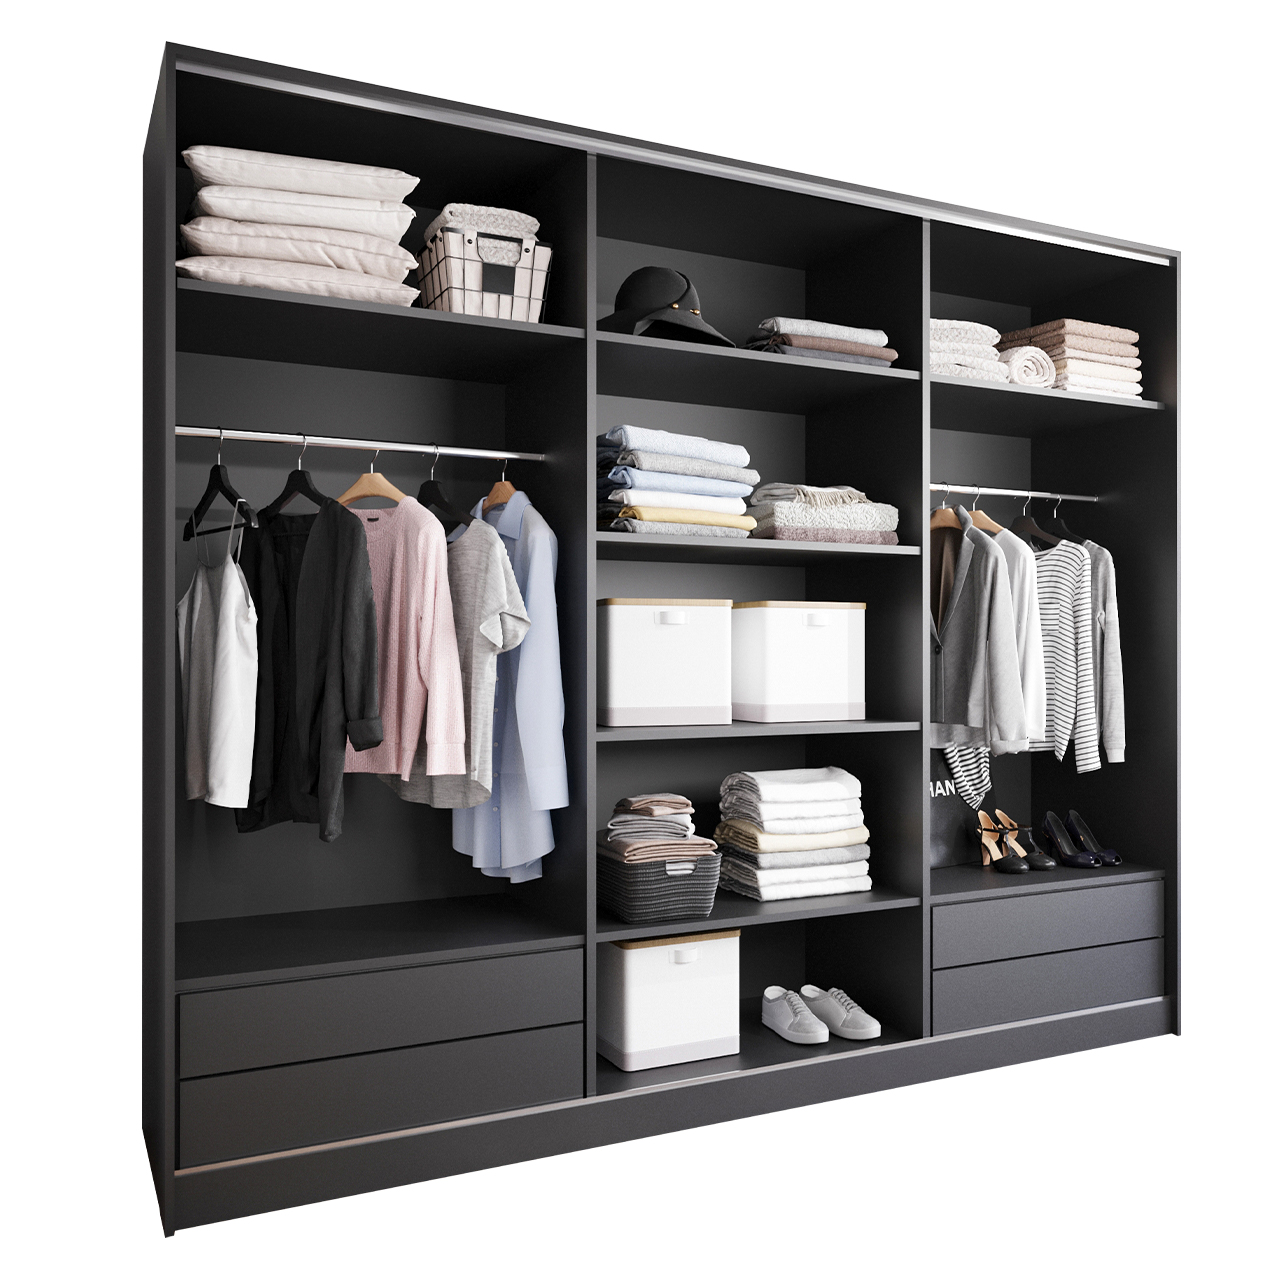 Sliding Wardrobe with Mirror and Drawers GRANO D 270 black